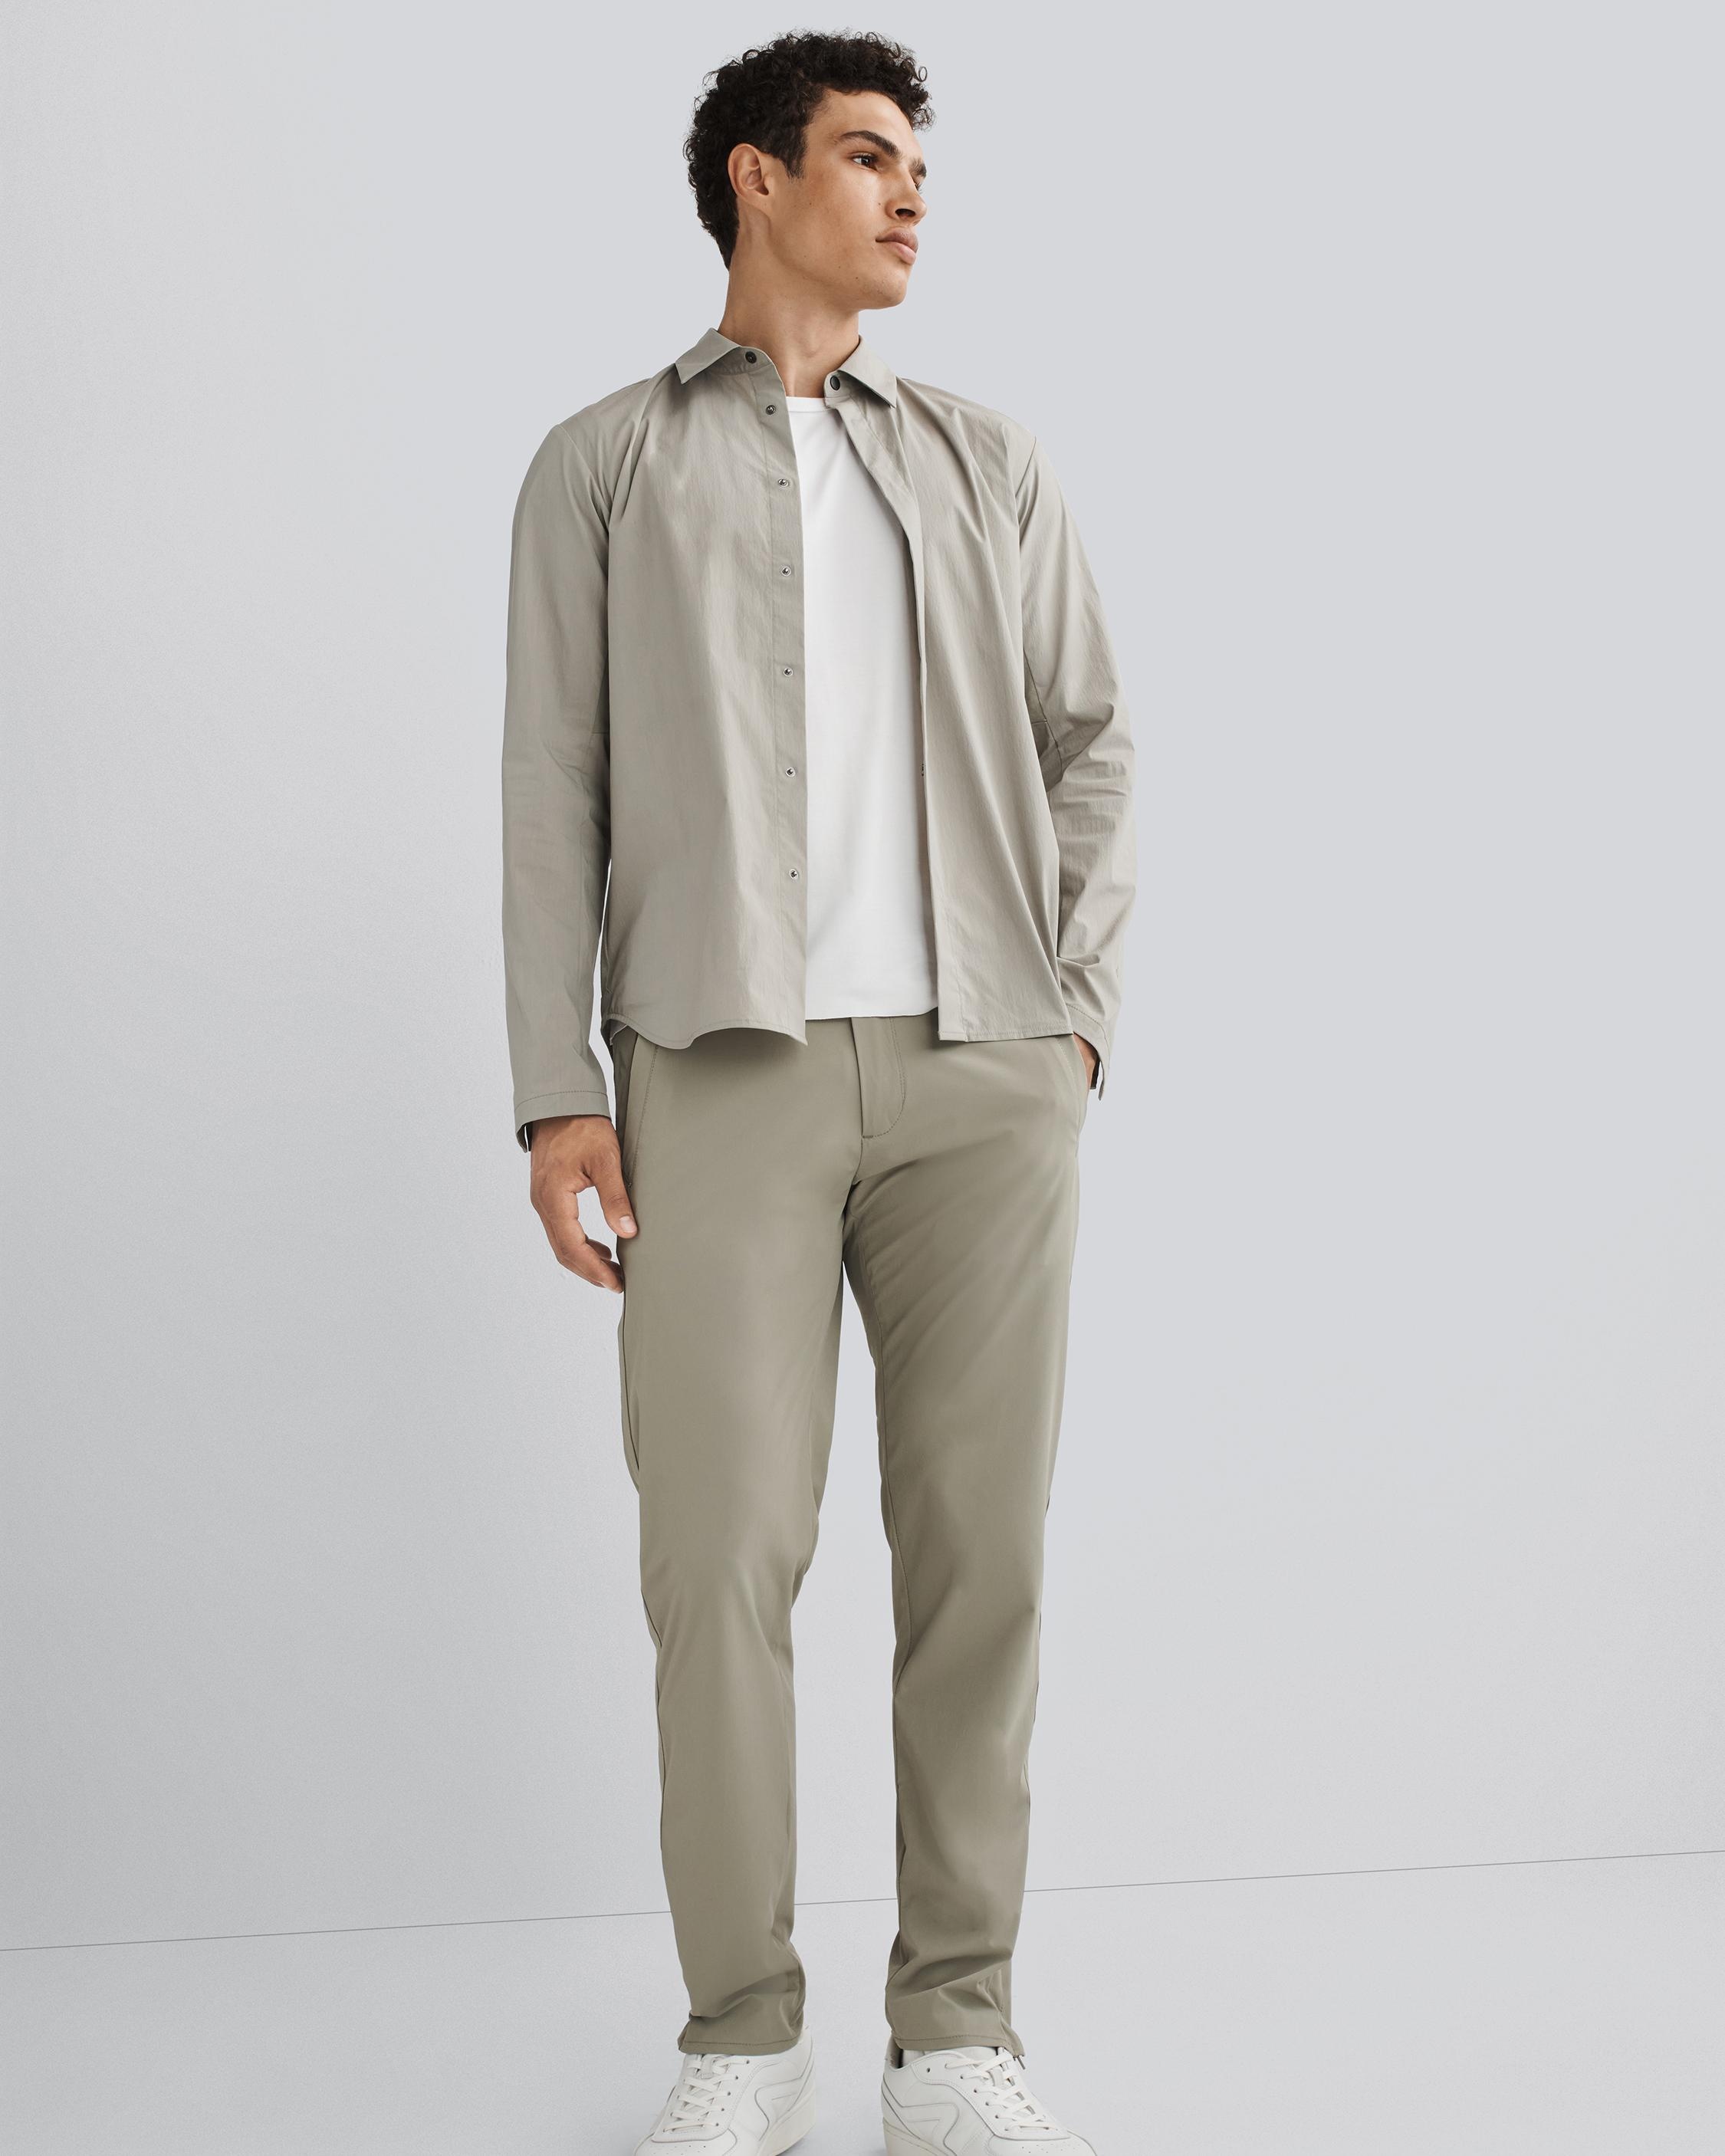 Pursuit Zander Technical Track Pant
Relaxed Fit - 6